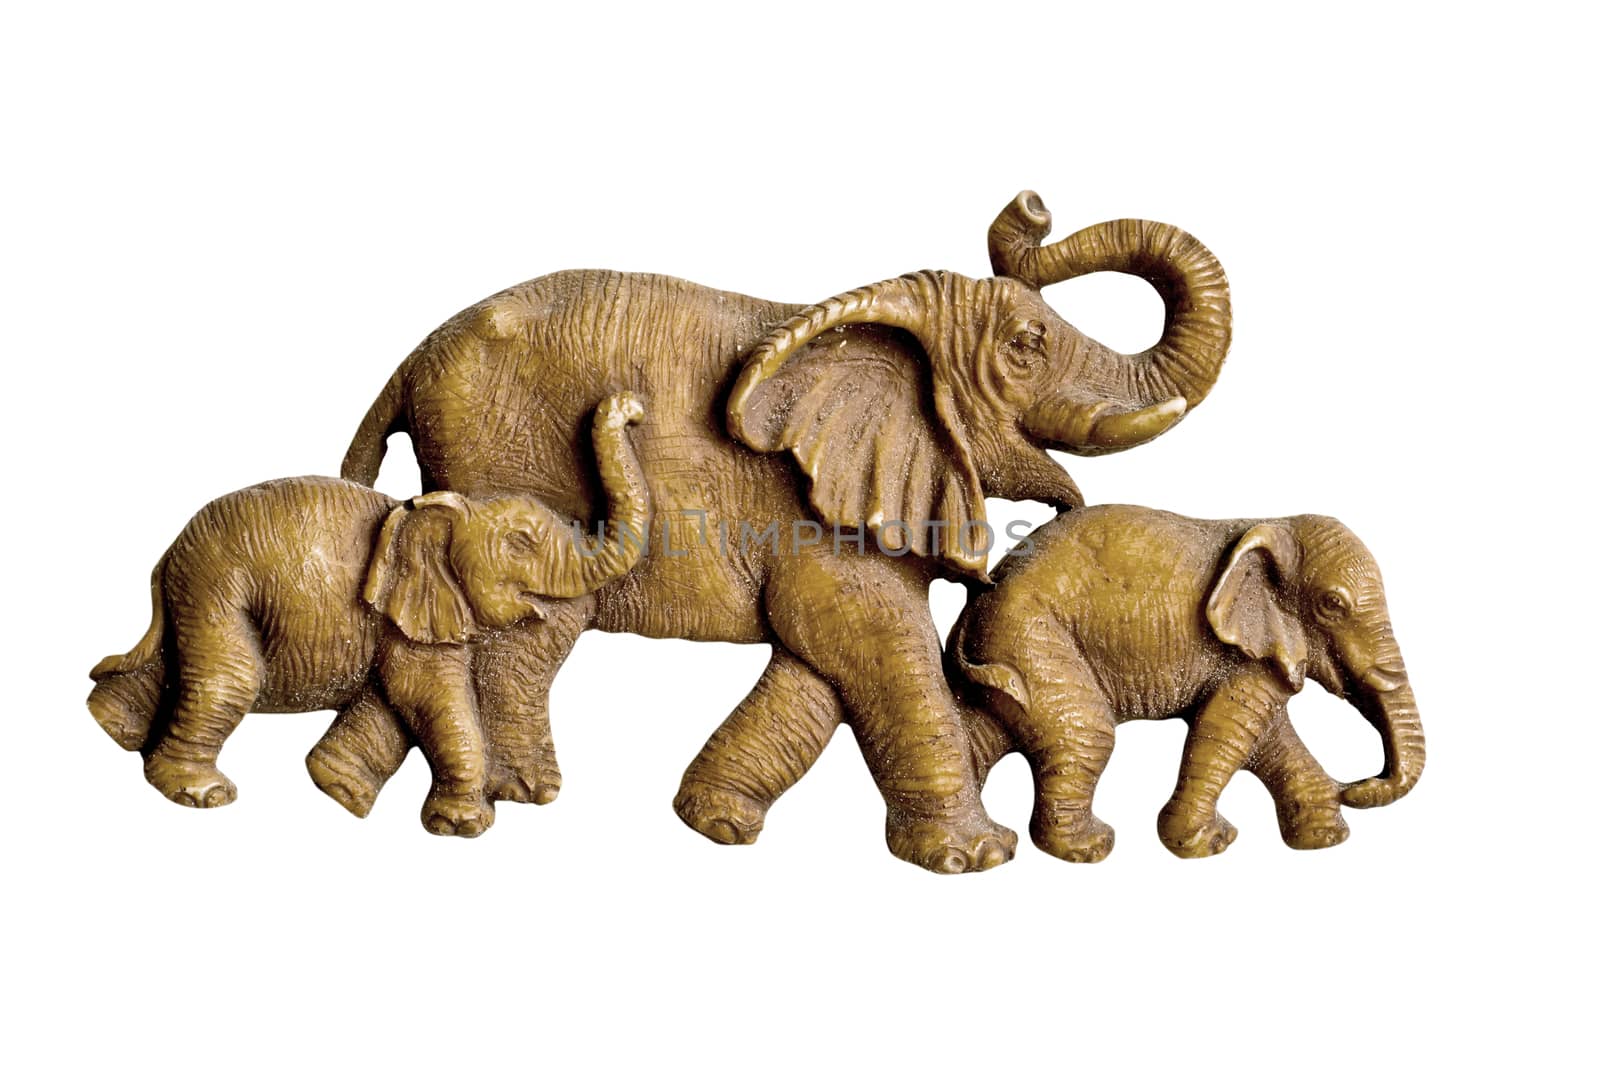 Carved wooden elephant on white background by Thanamat